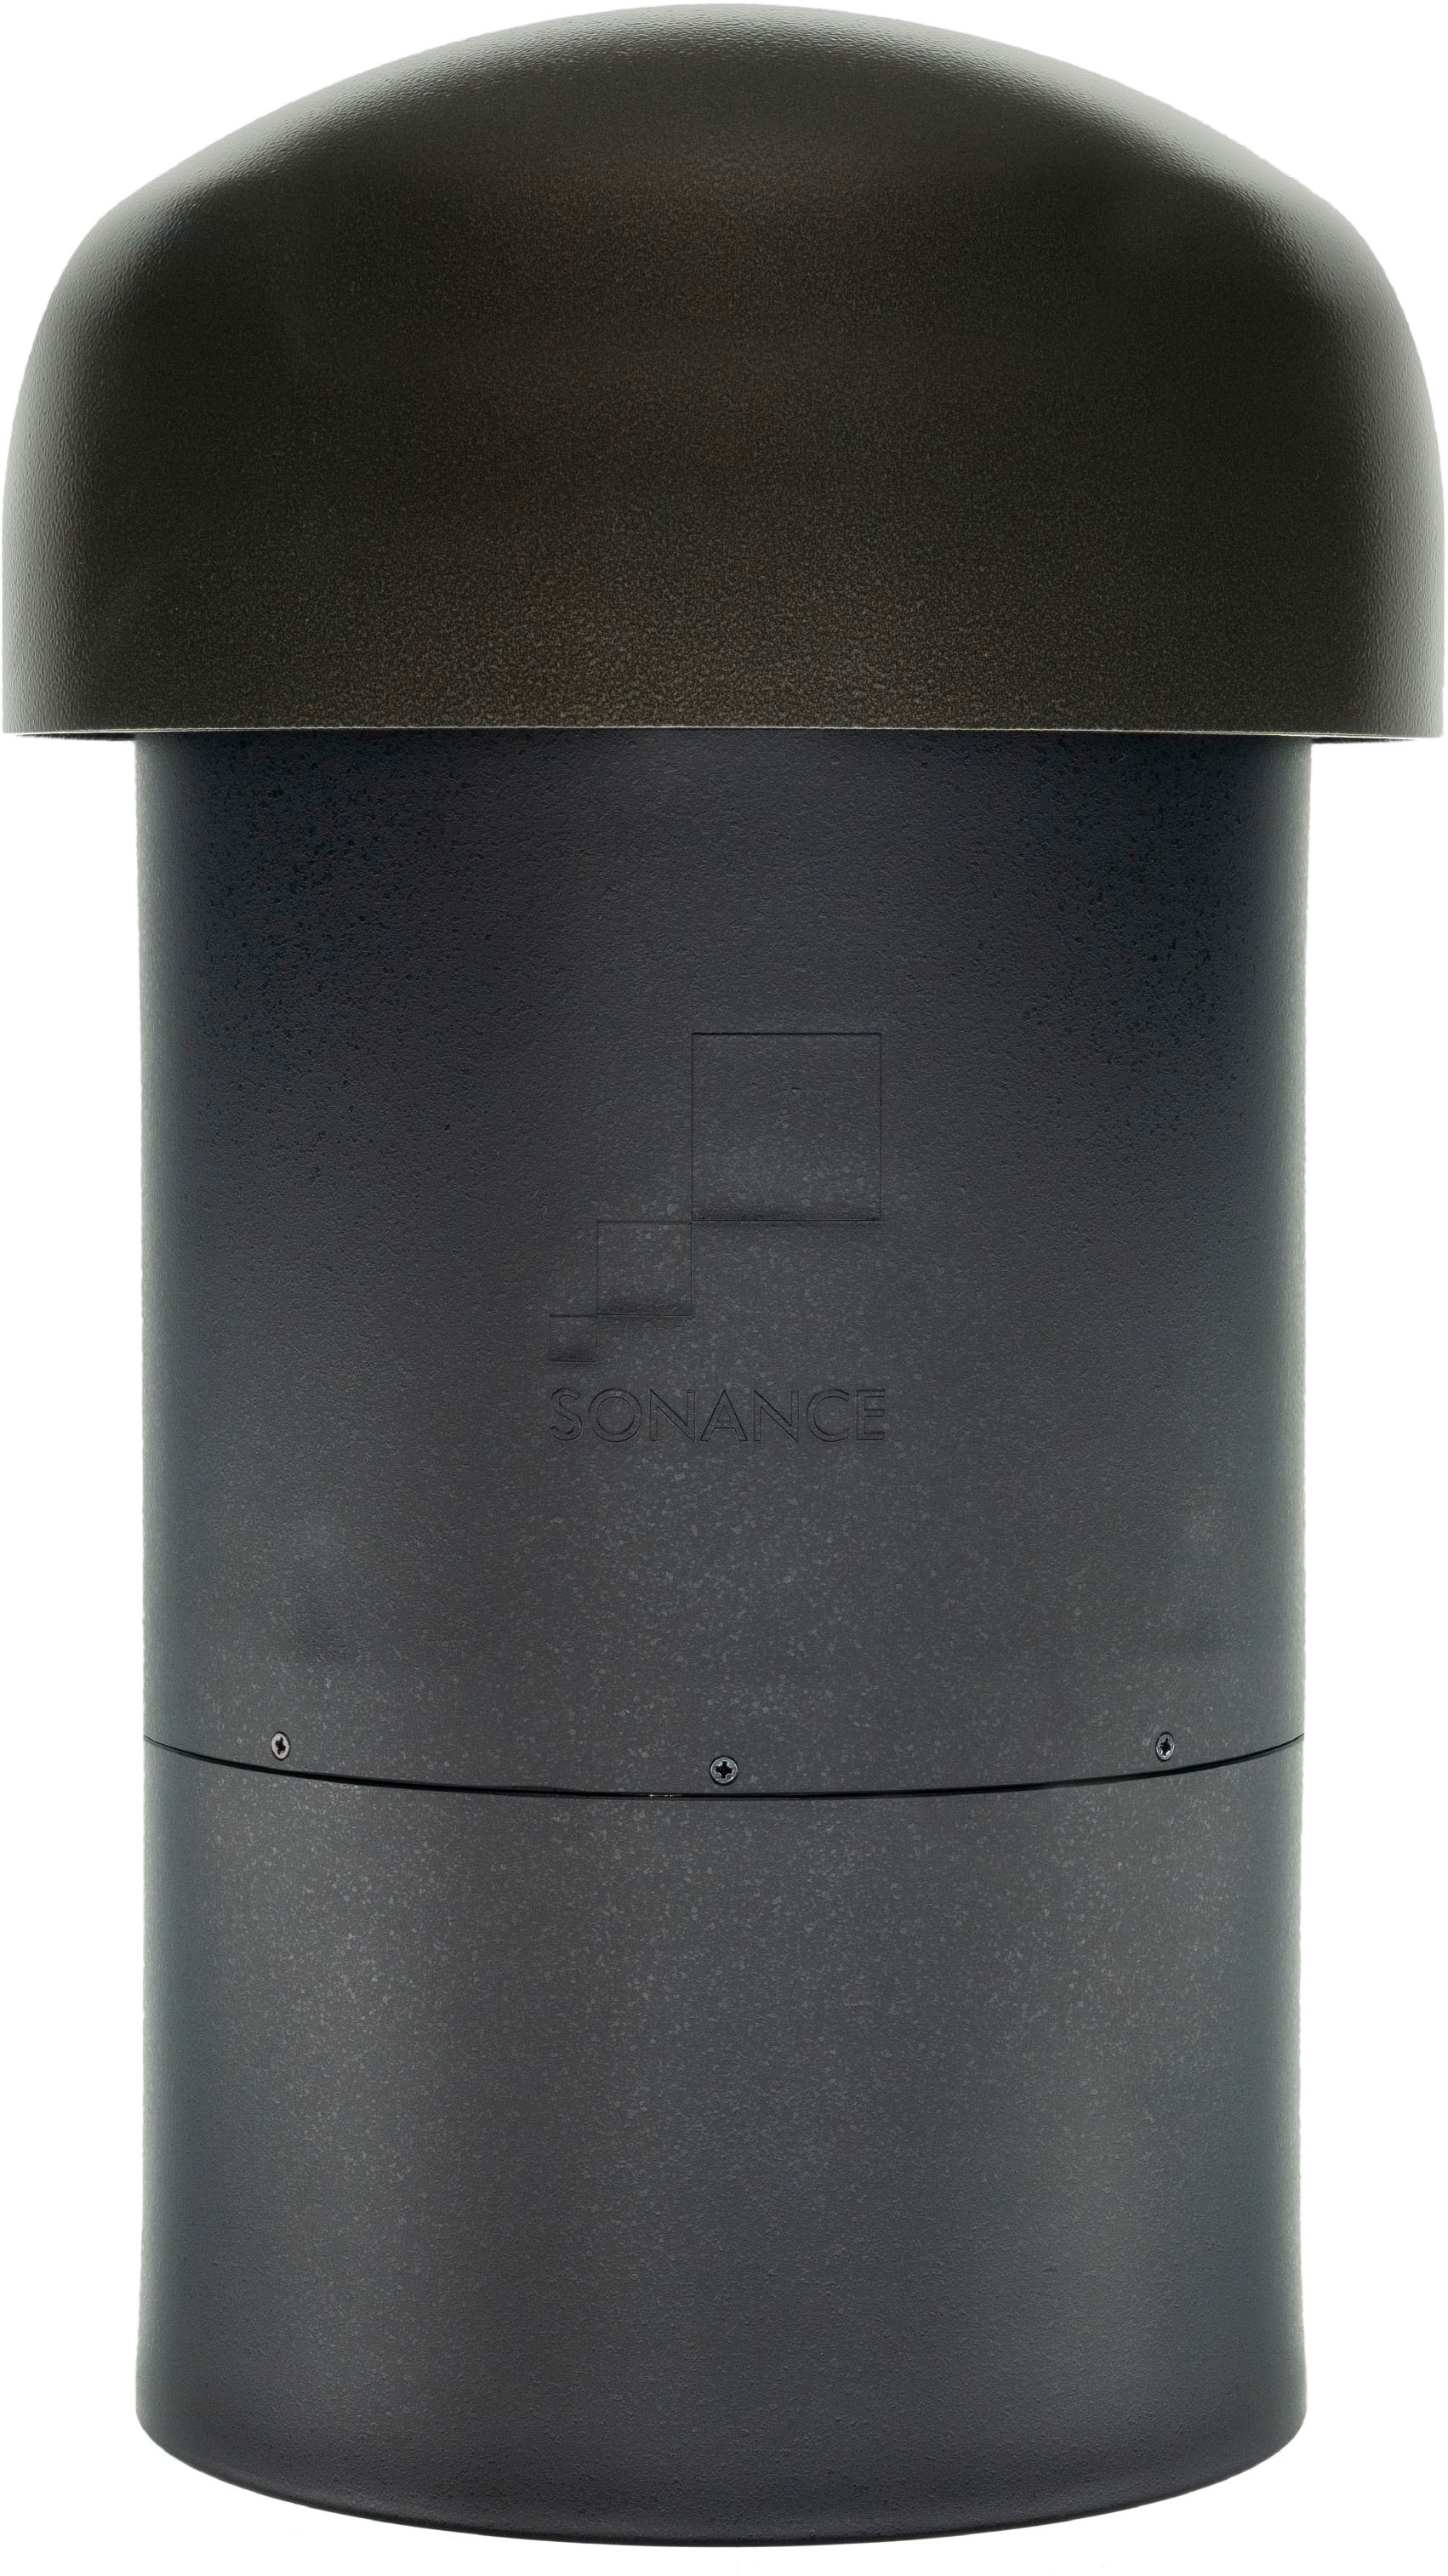 Angle View: Sonance - Reference 5-1/4" 3-Way Cabinet Speaker (Each) - Black